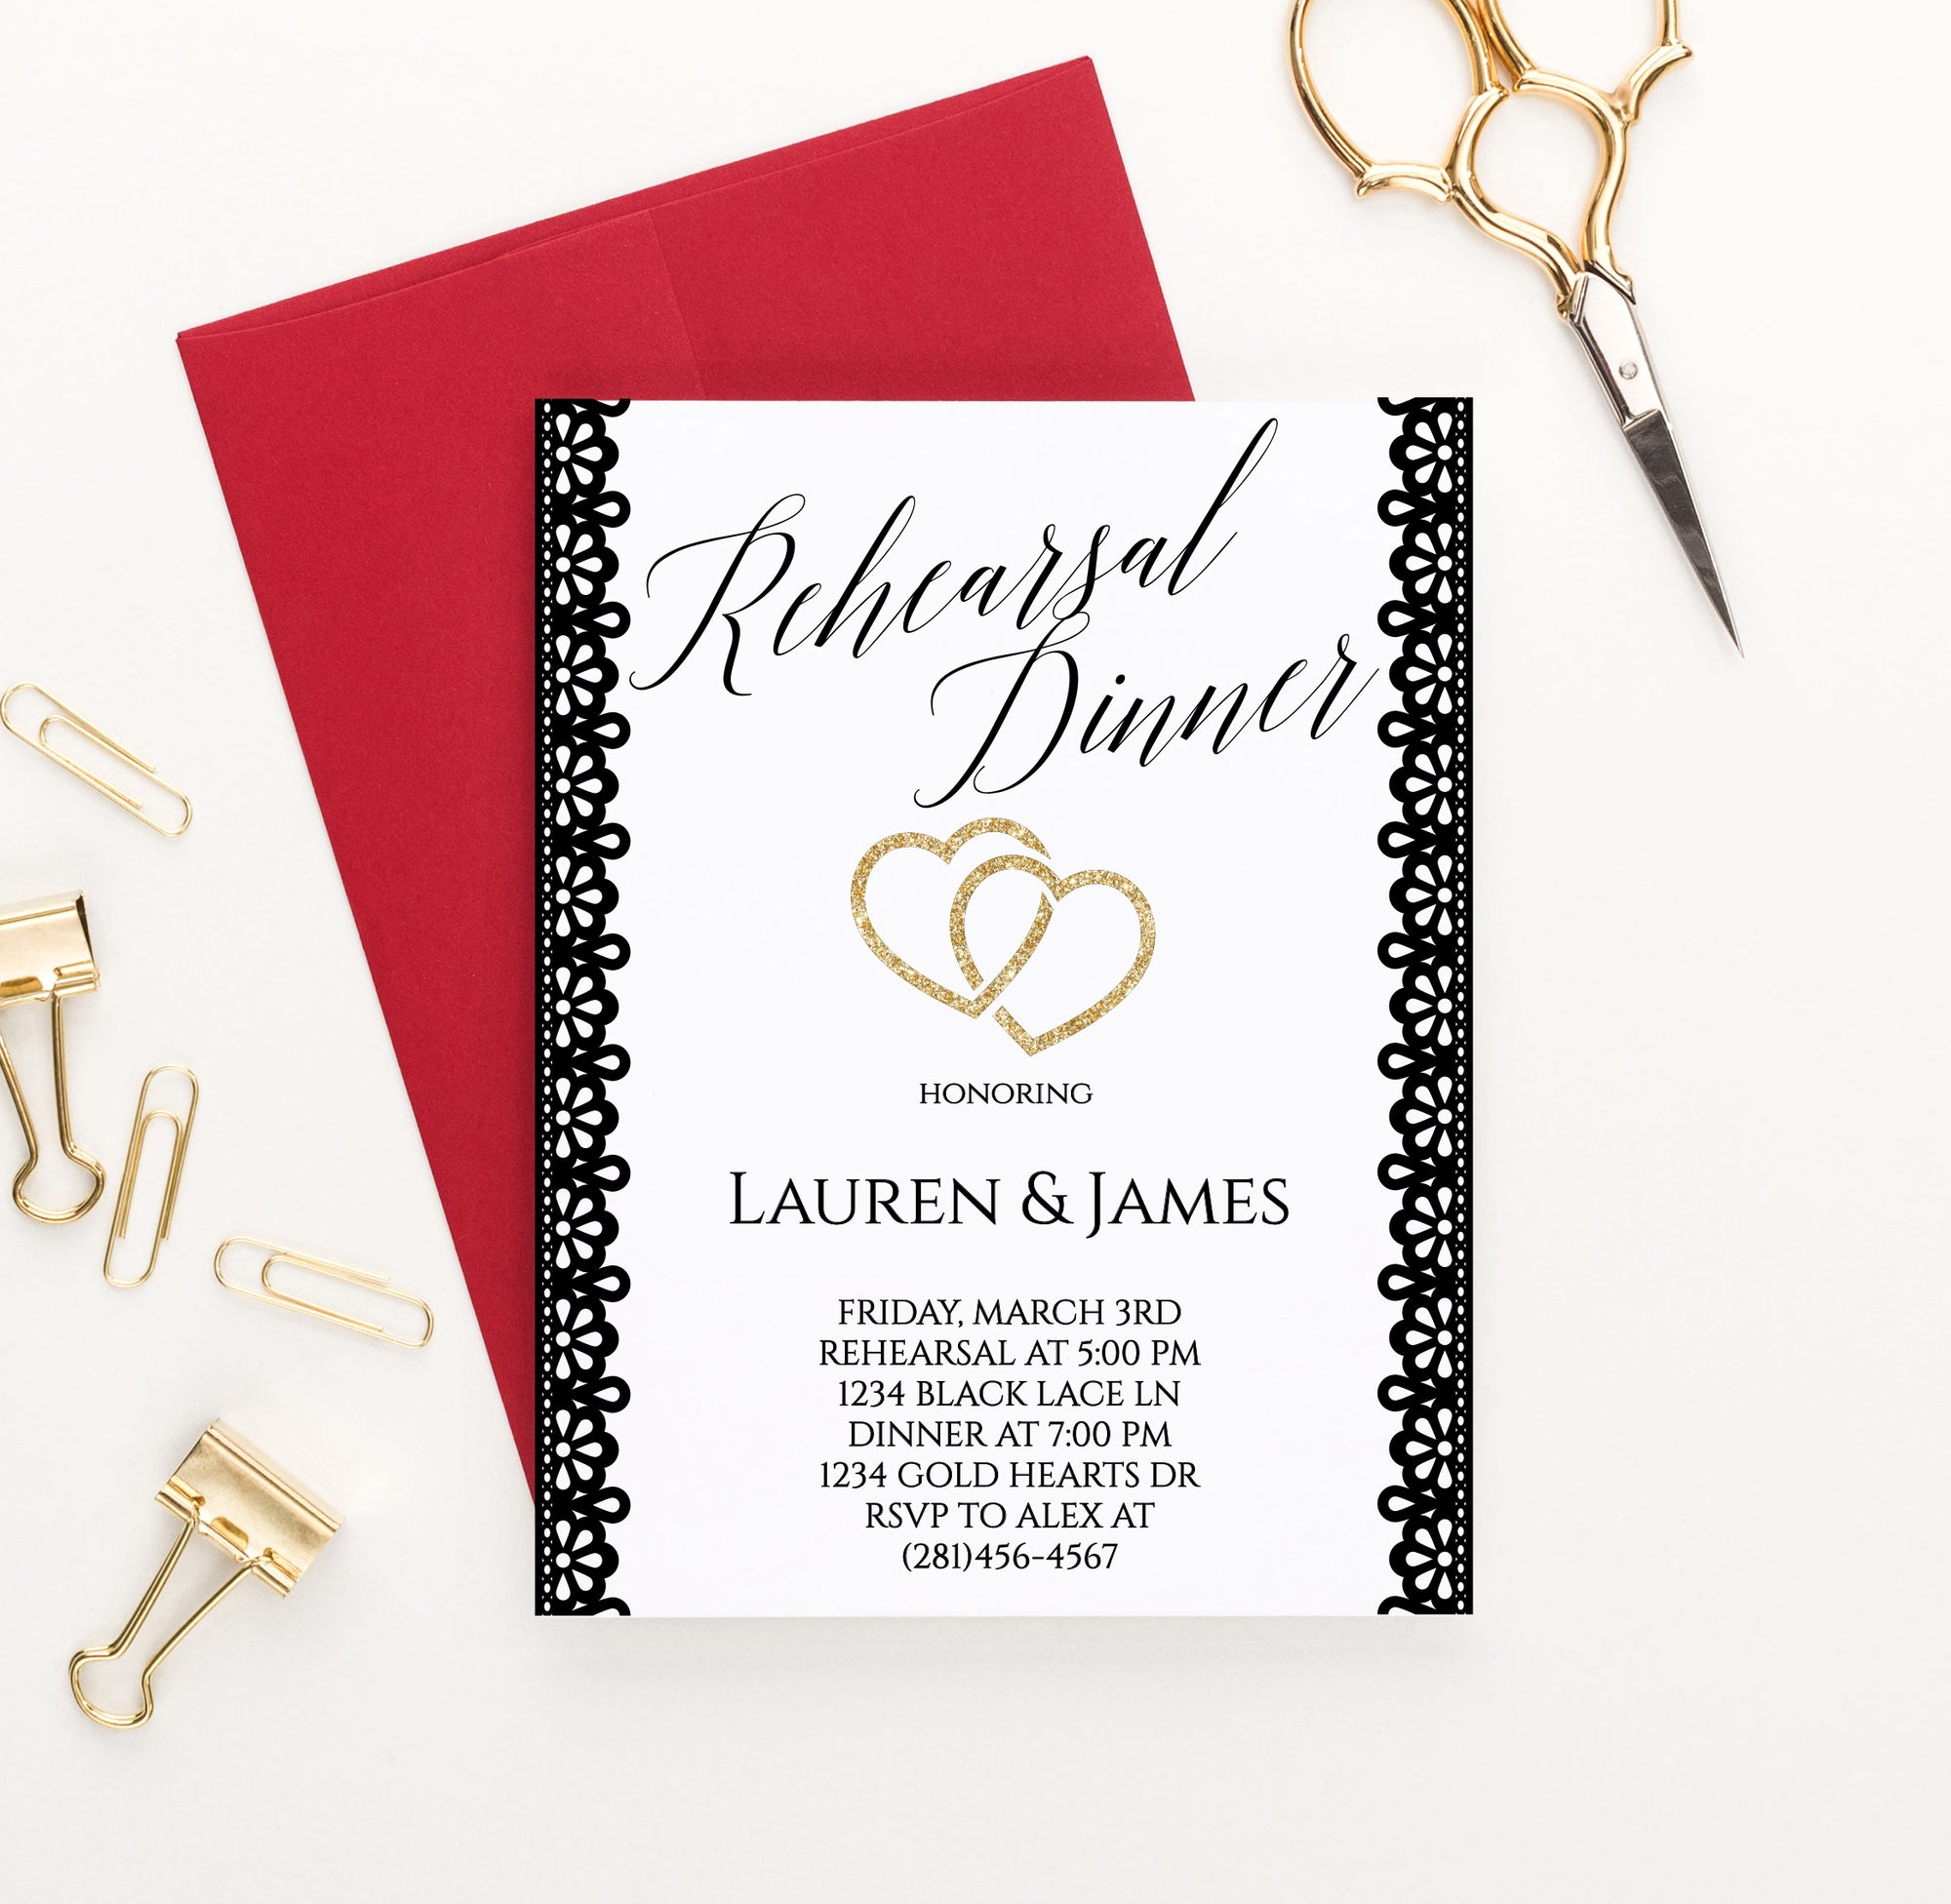 Black Lace Rehearsal Dinner Invitations Personalized